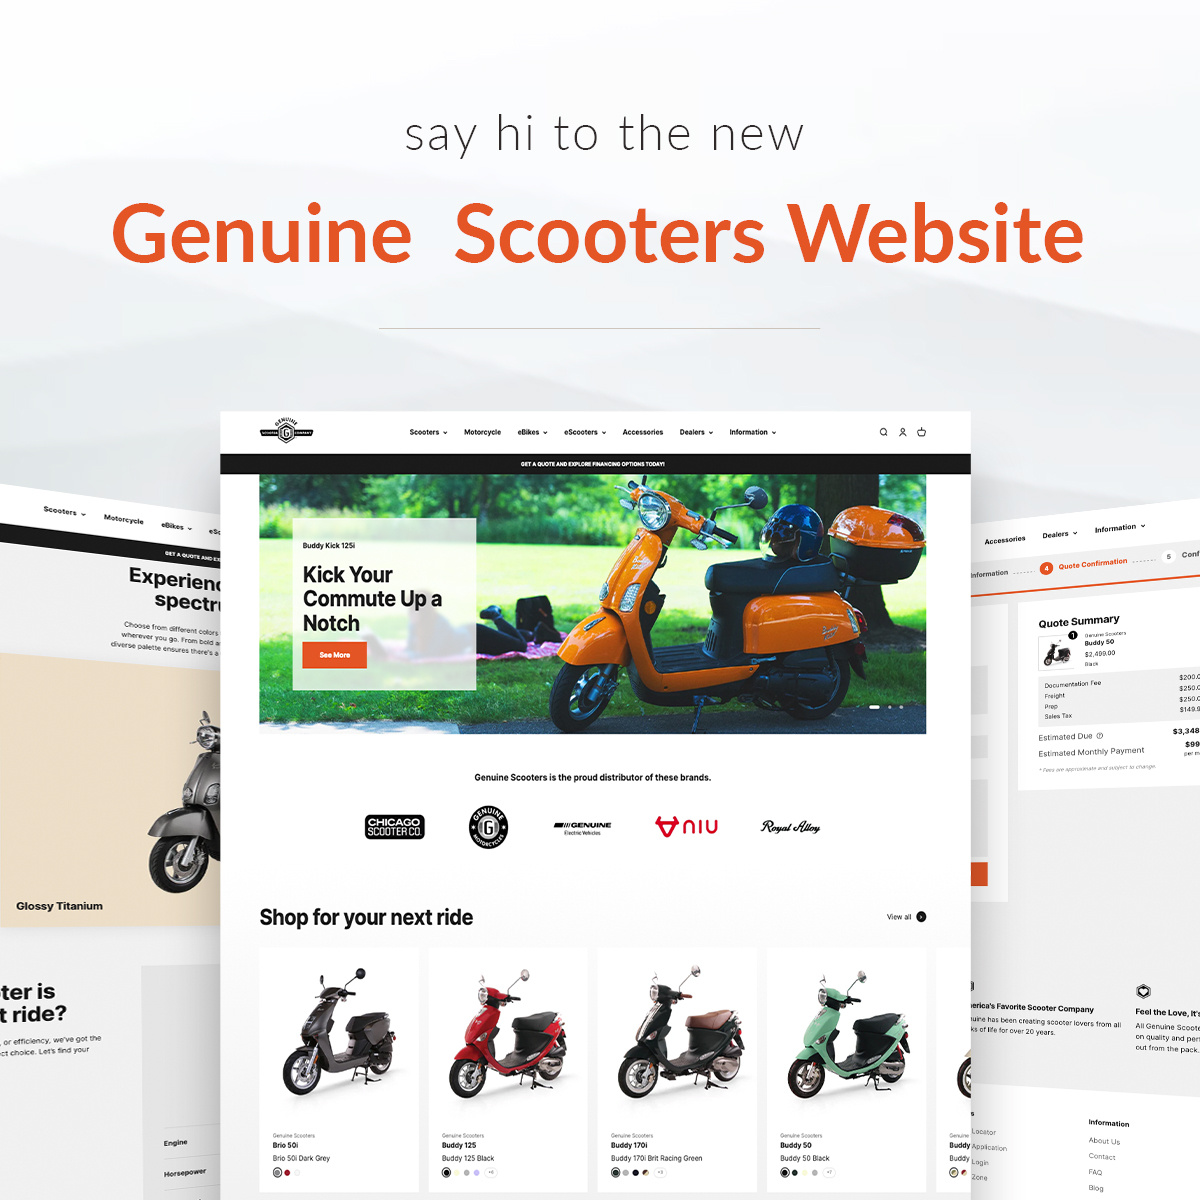 We're excited to announce that the new Genuine Scooters website is LIVE! Loaded with lots of information to make your buying decision easy, compare models online and request a quote today! 
#genuinescooter #genuinescooters #scooters #twowheels #fun #ridegenuine #website #newsite